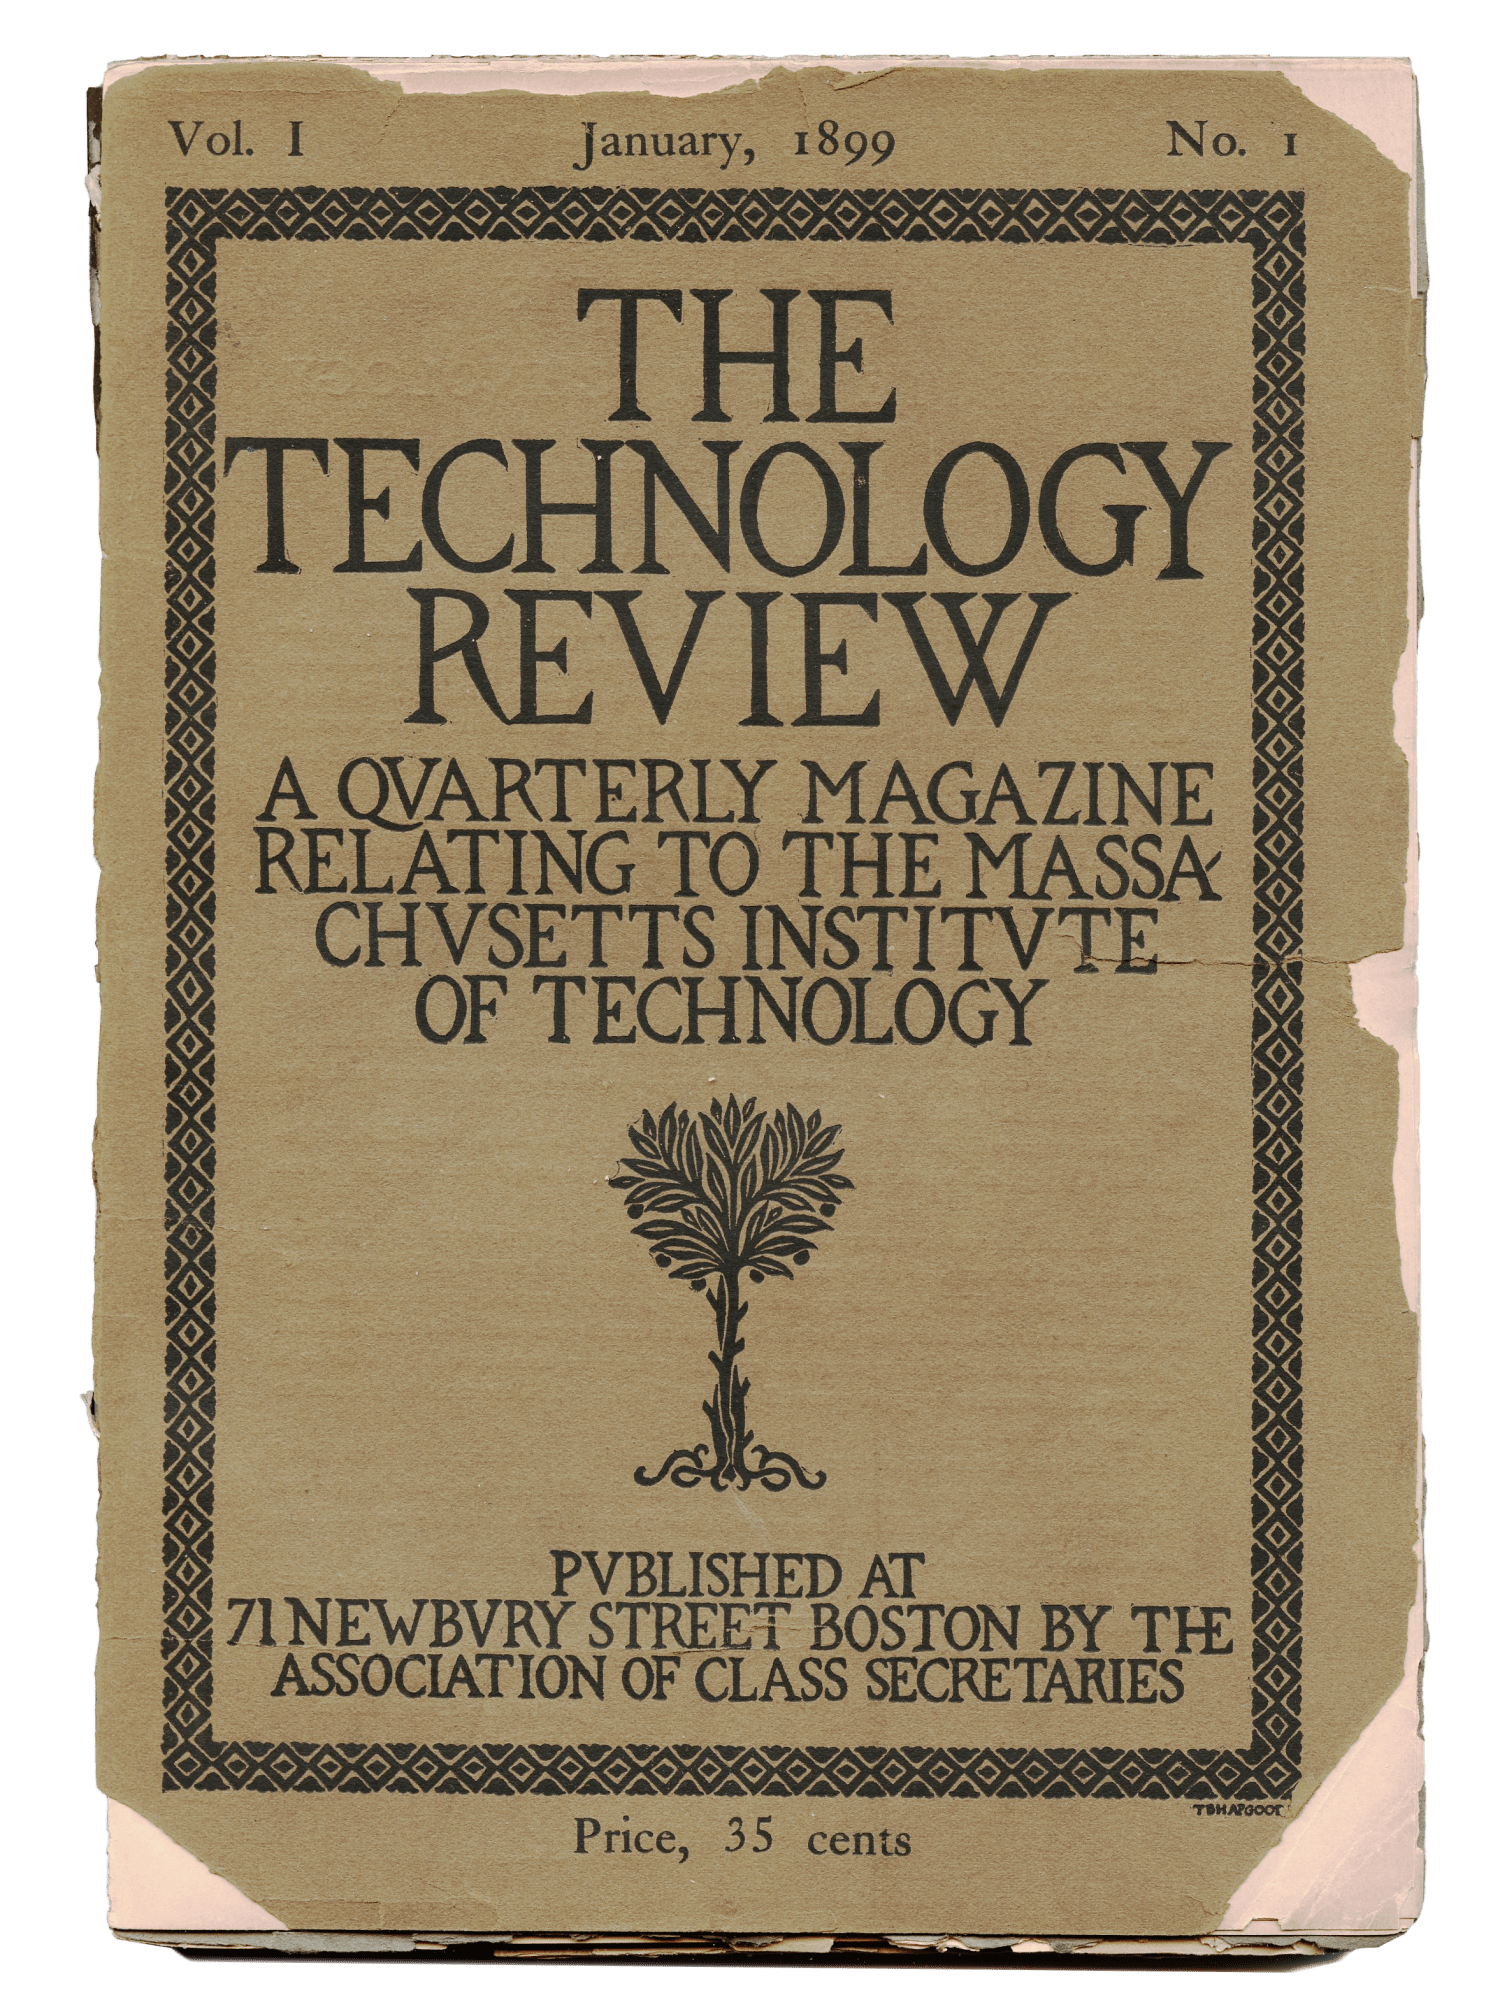 cover of the Vol 1, No. 1 January 1899 issue of The Technology Review